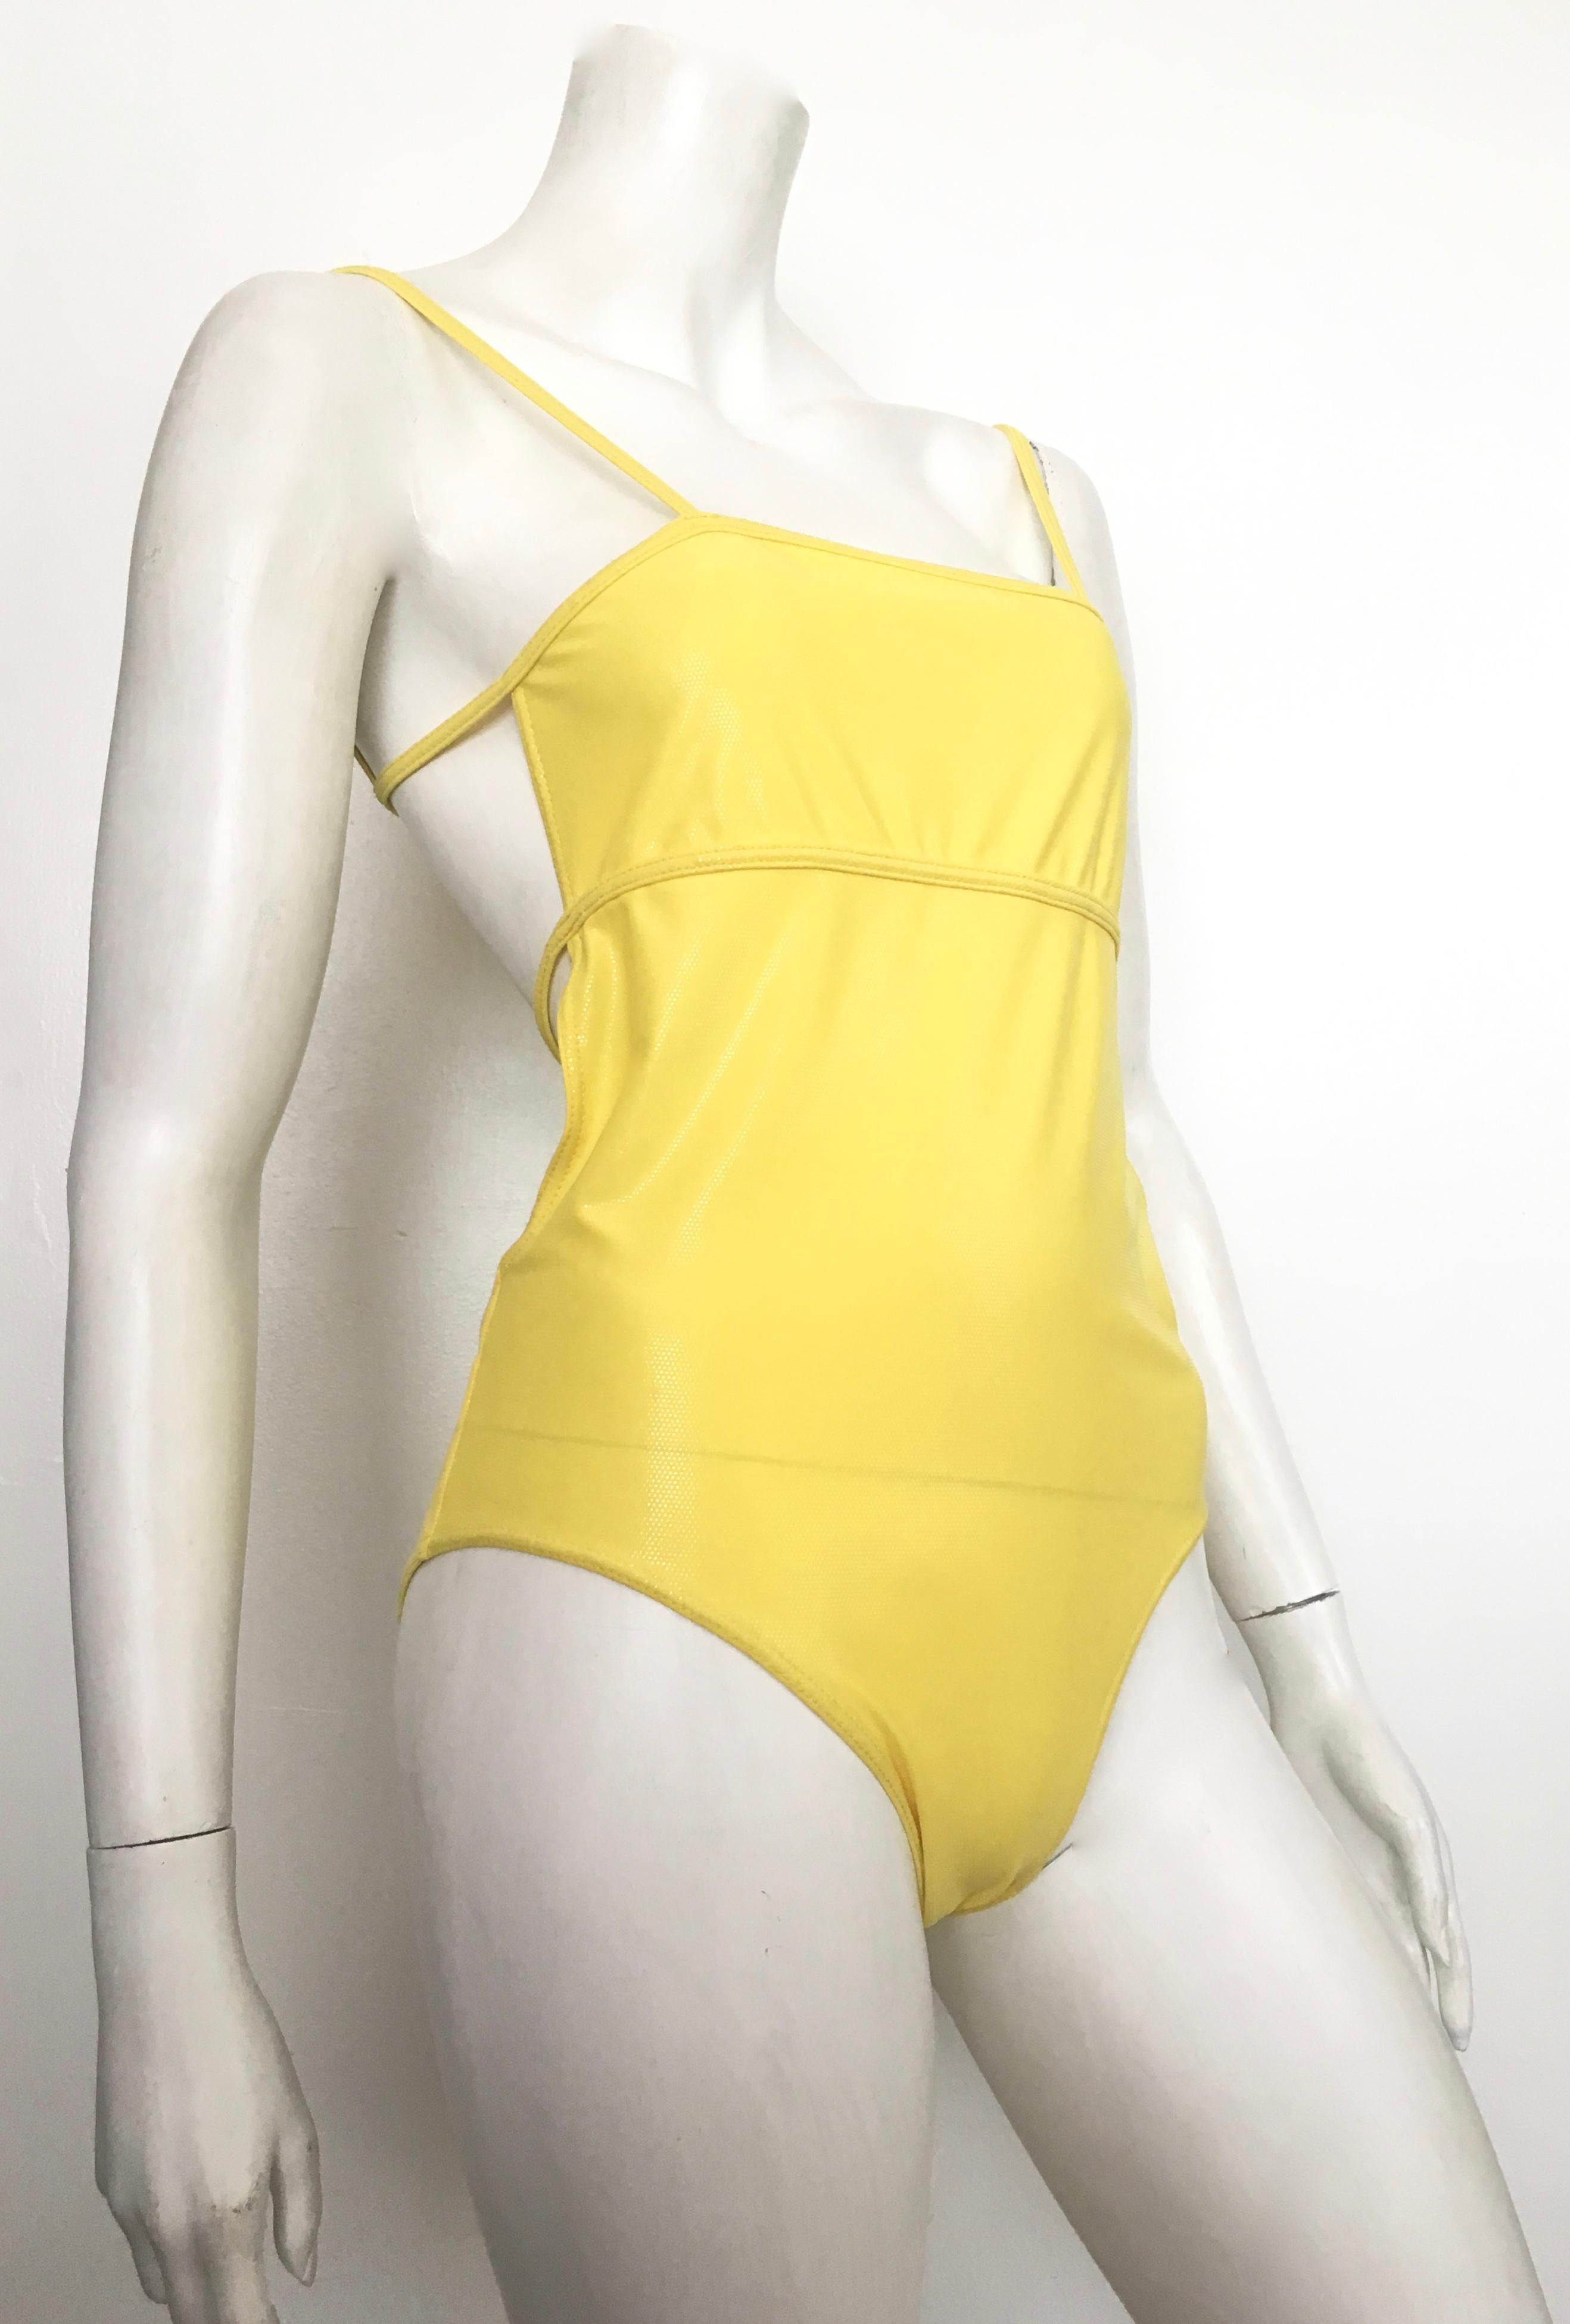 Herve Leger yellow swimsuit is a French size 40 and fits a size 8.  This stunning design will have everyone's eyes on you while walking the beaches of Cabo, Majorca, St.Tropez or the Red Neck Rivera of the Alabama coastline. This is a size 8 so it